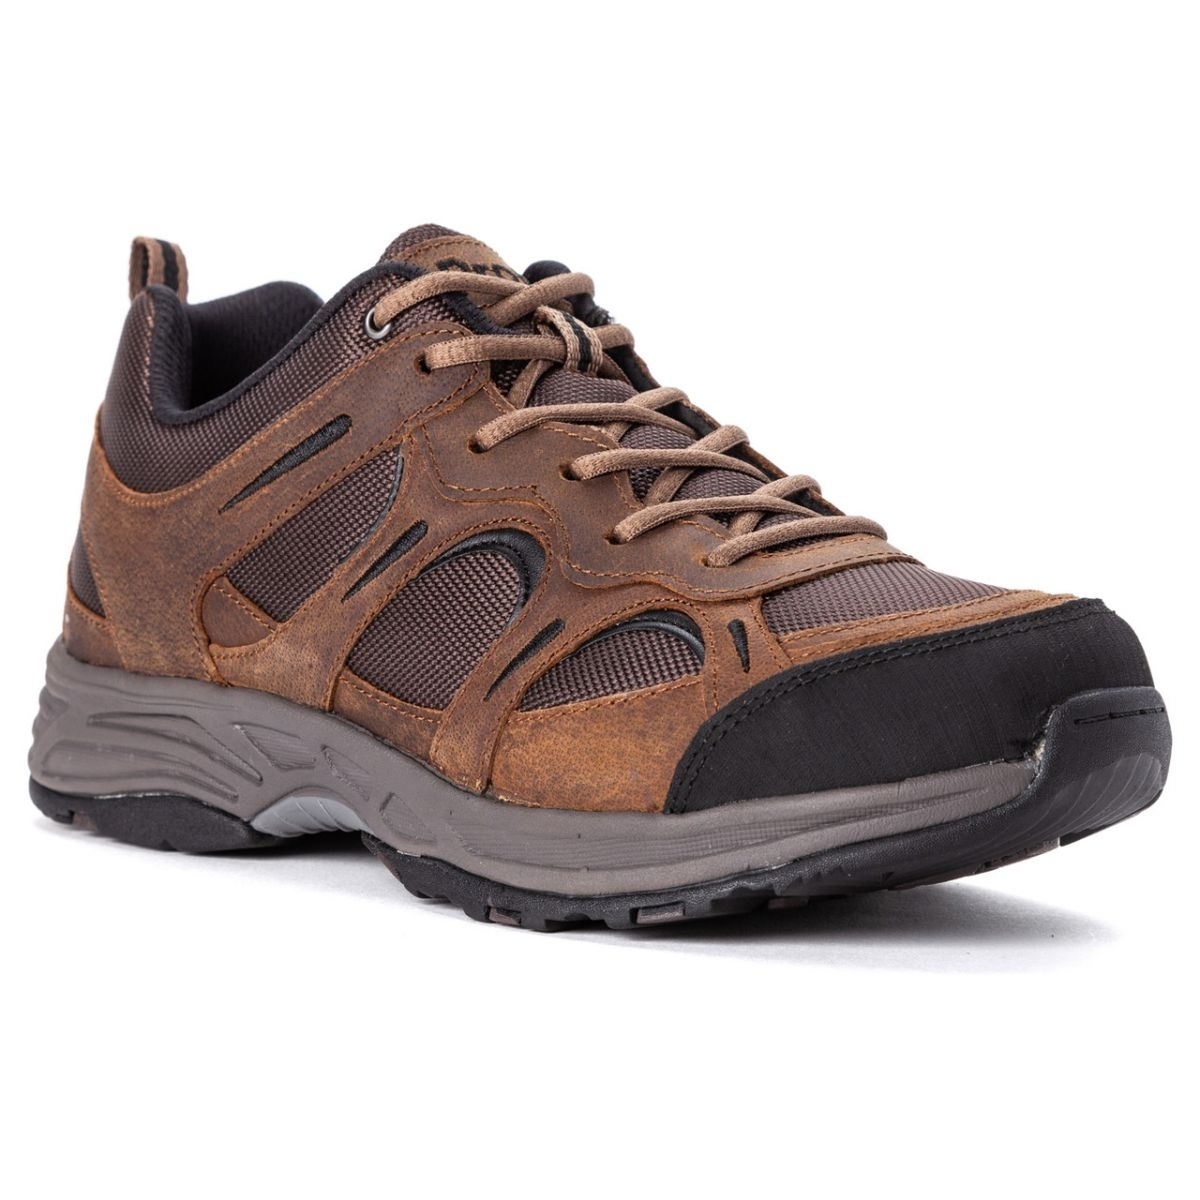 Propet Men's Connelly Hiking Shoe Brown - M5503BR BROWN - BROWN, 16